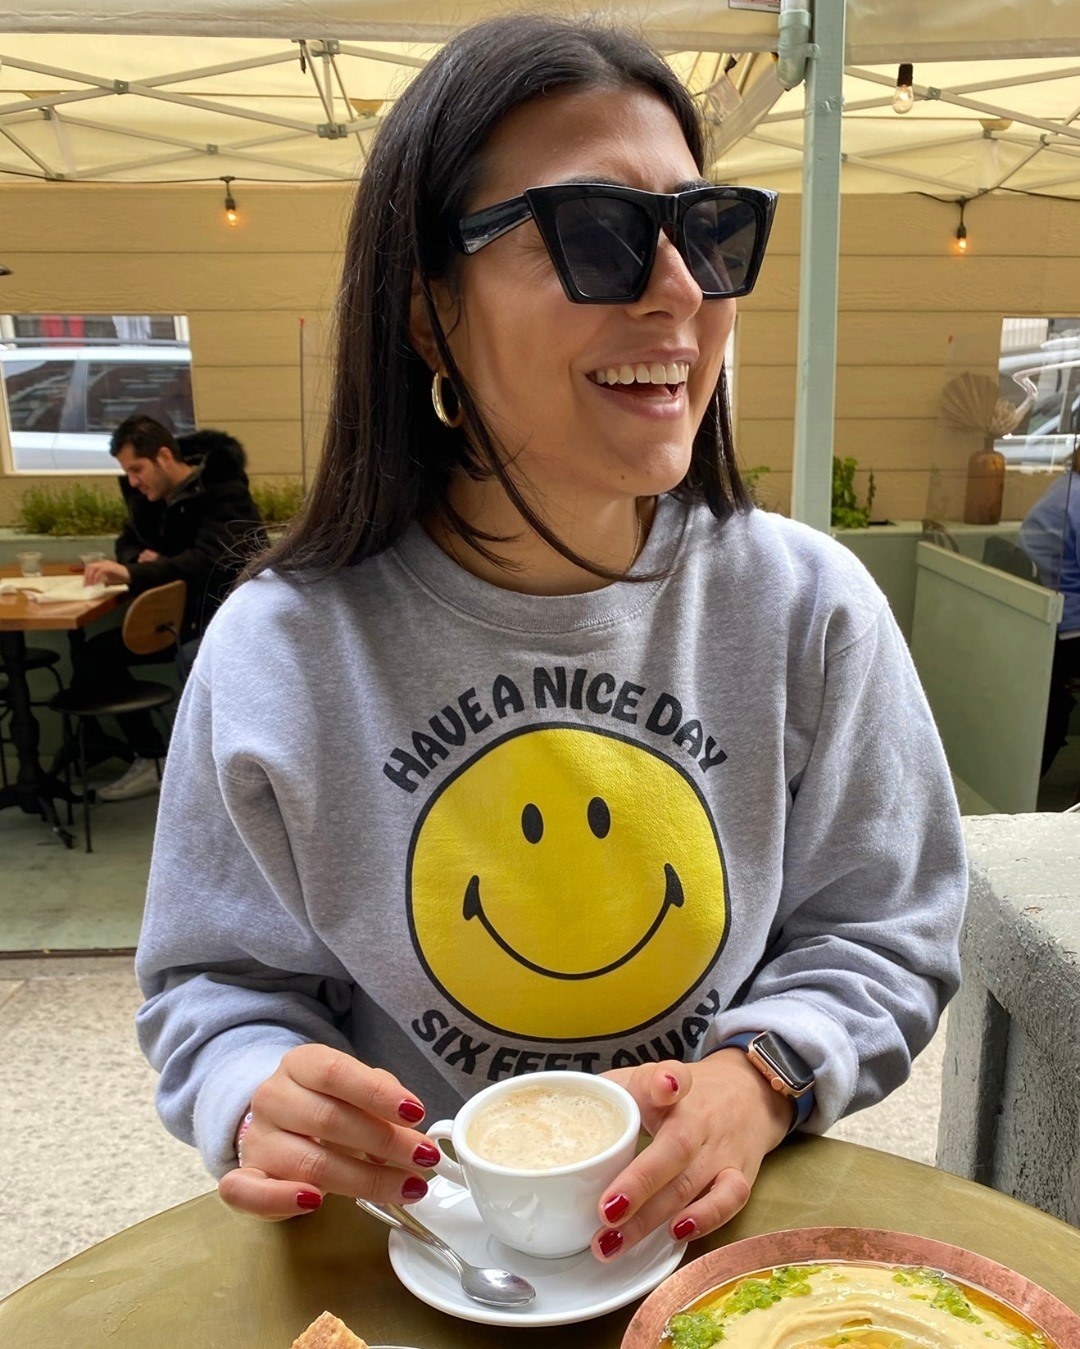 buzzfeed employee wearing a gray sweatshirt with a yellow smiley on it and the words &quot;have a nice day six feet away&quot; on it